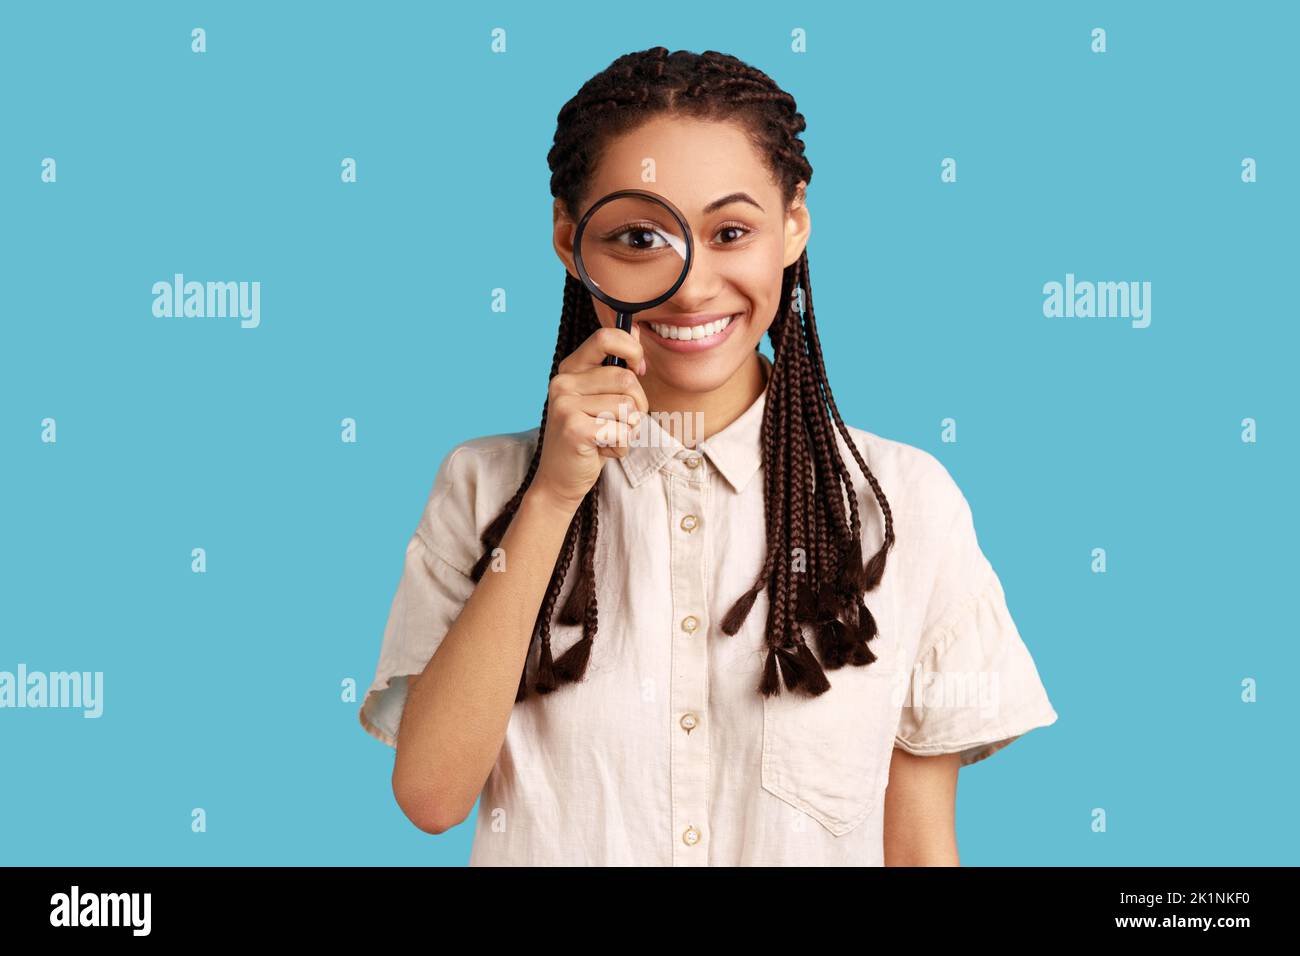 Portrait of funny woman with black dreadlocks holding magnifying glass and looking at camera with big zoom eye, positive face, wearing white shirt. Indoor studio shot isolated on blue background. Stock Photo